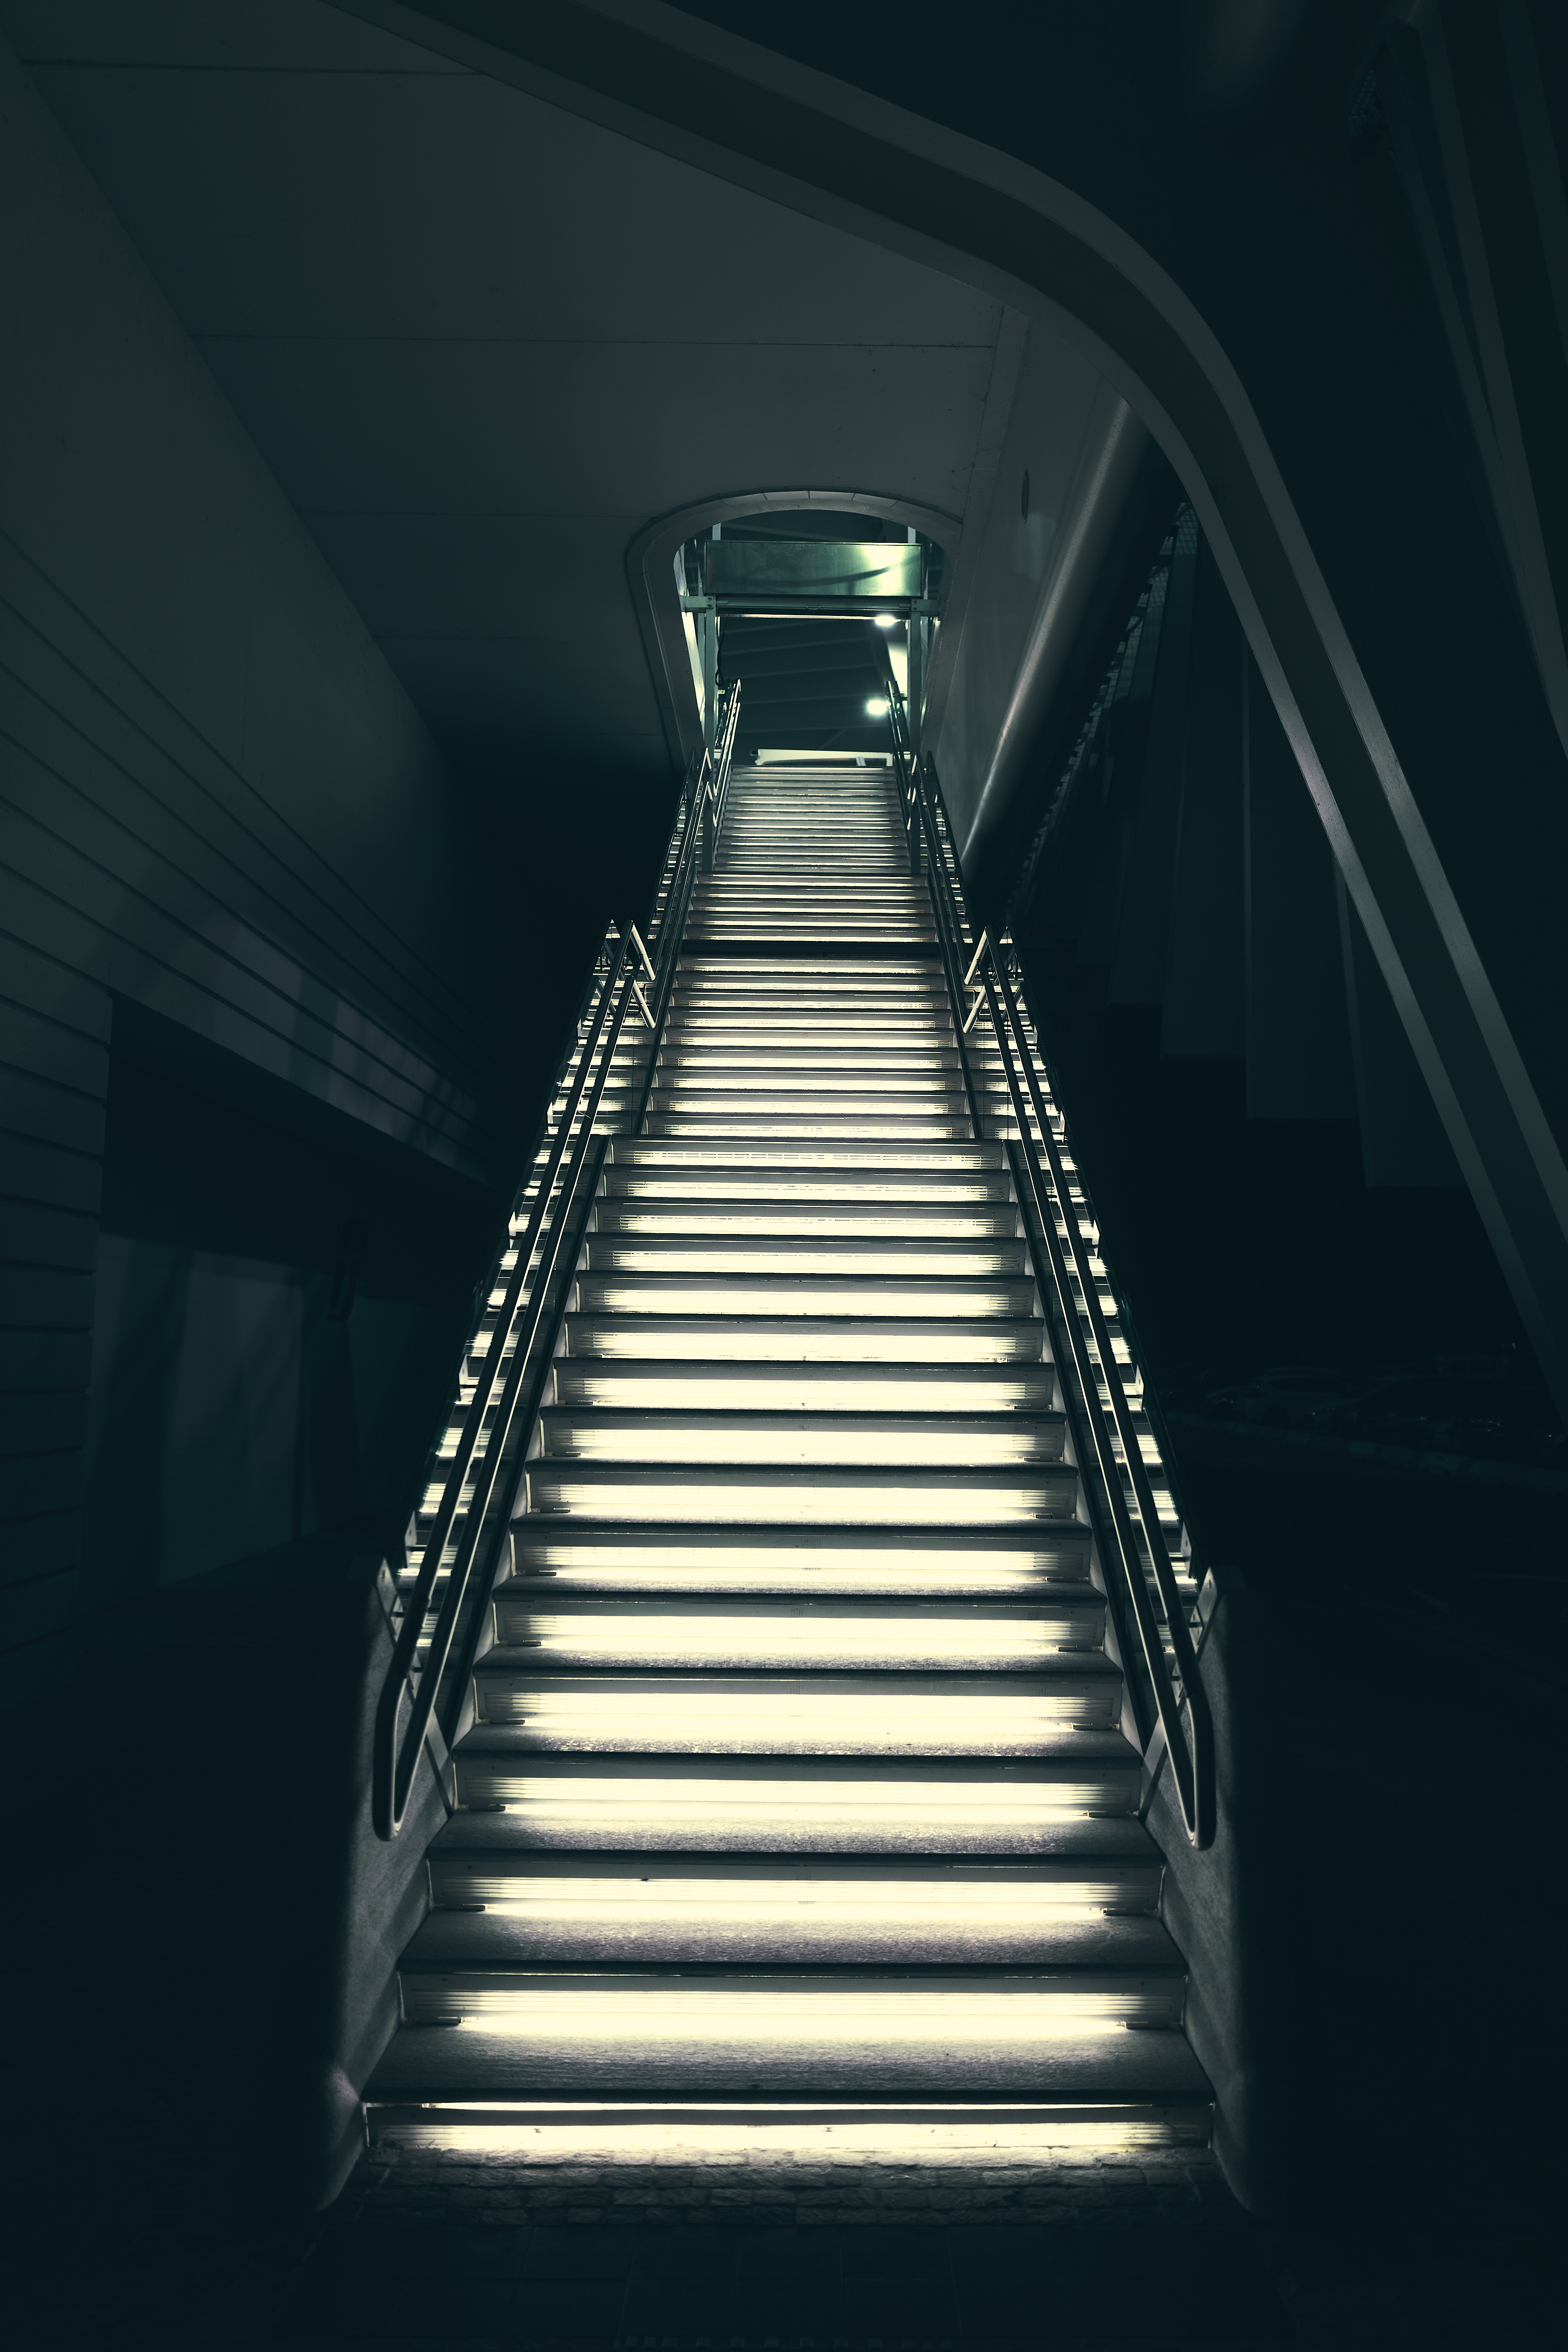 backlight, miscellanea, miscellaneous, illumination, stairs, ladder, output, exit